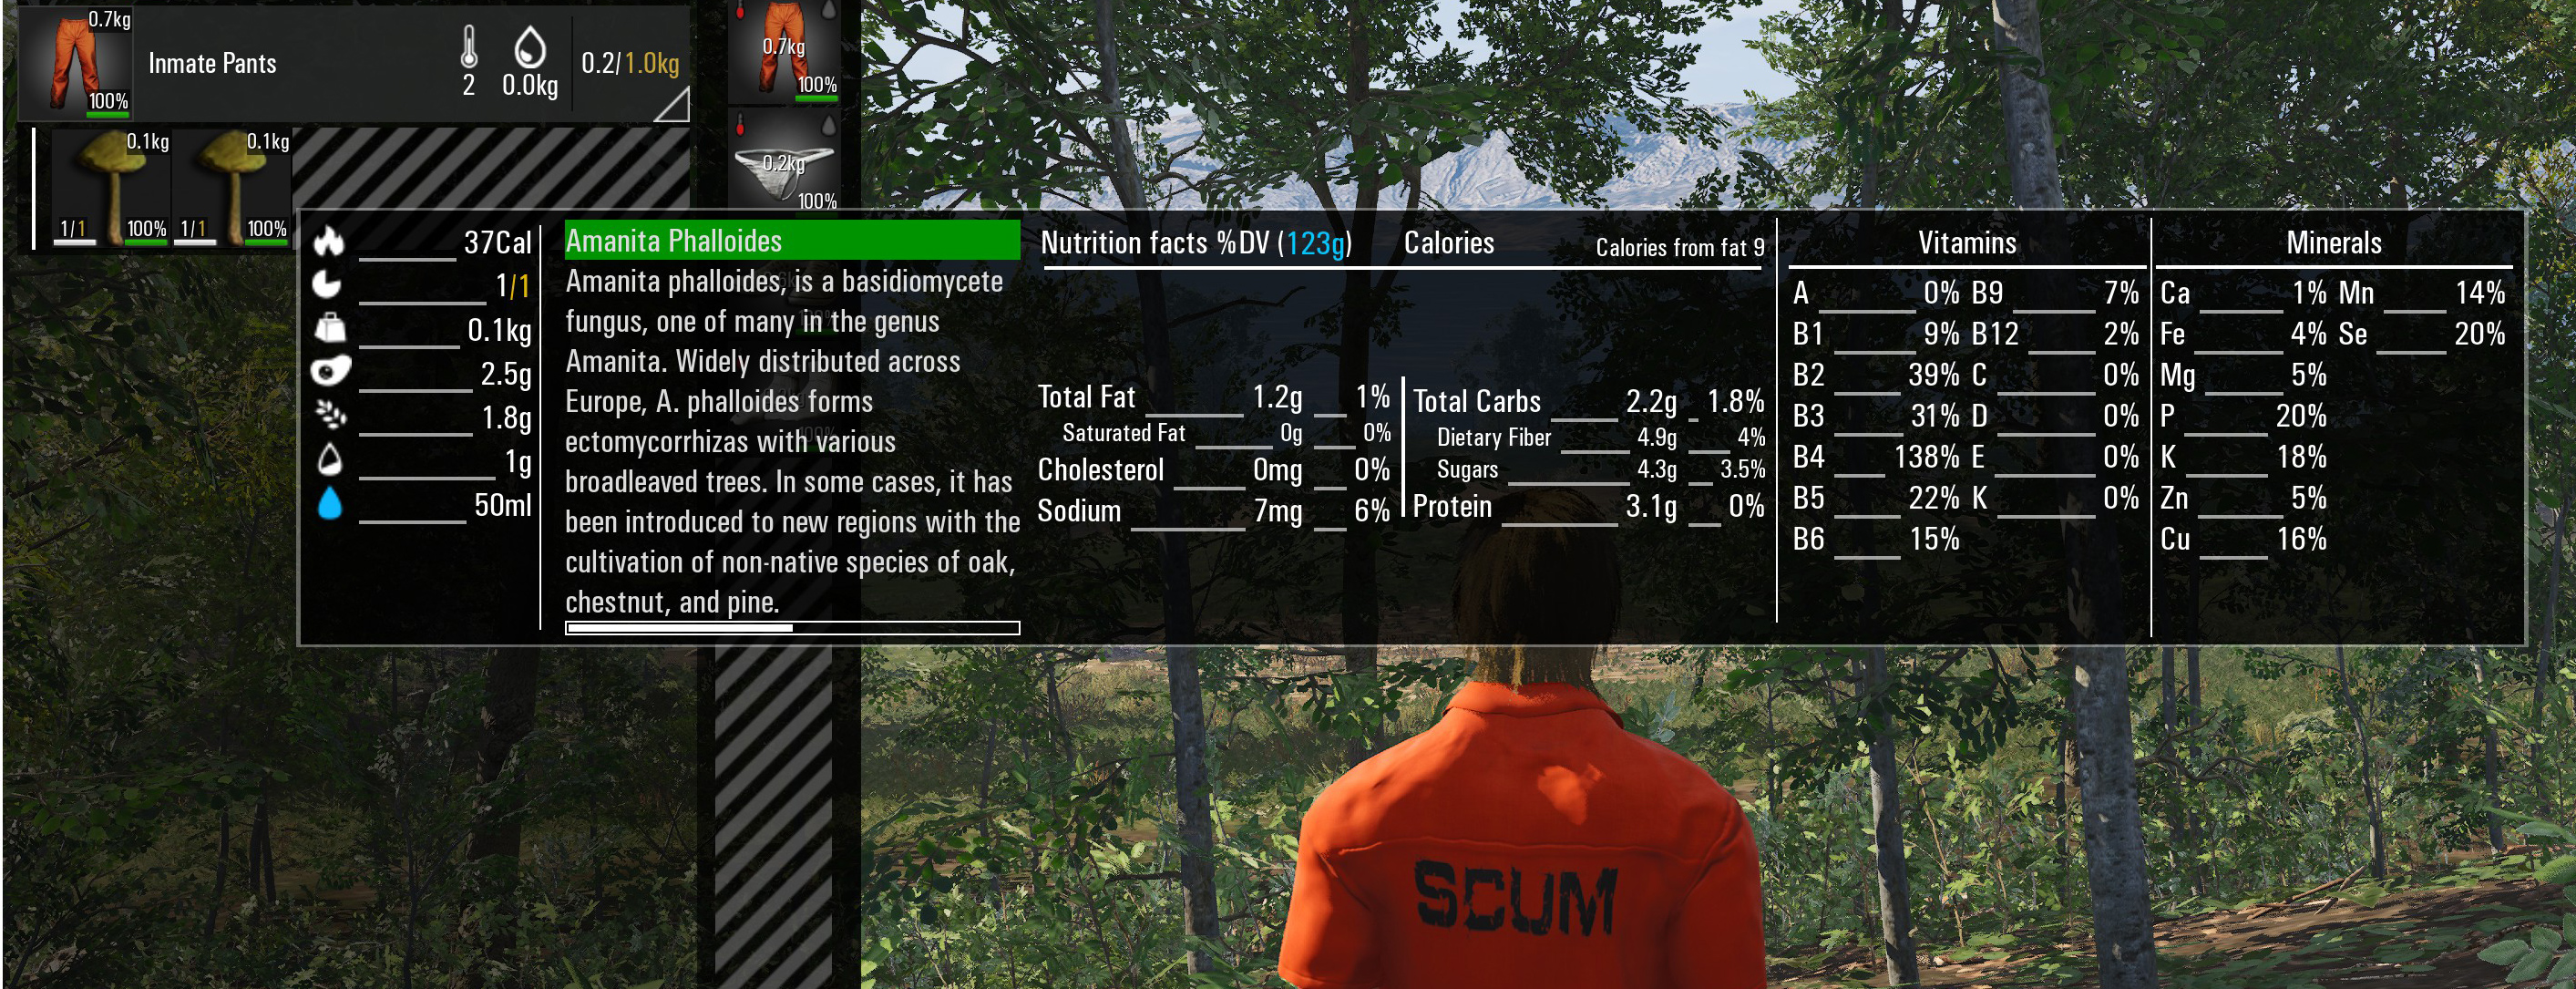 SCUM Food for Metabolism and Vitamins (Not to Get Hungry Fast) - Mushrooms and detailed food information - 43BAA84